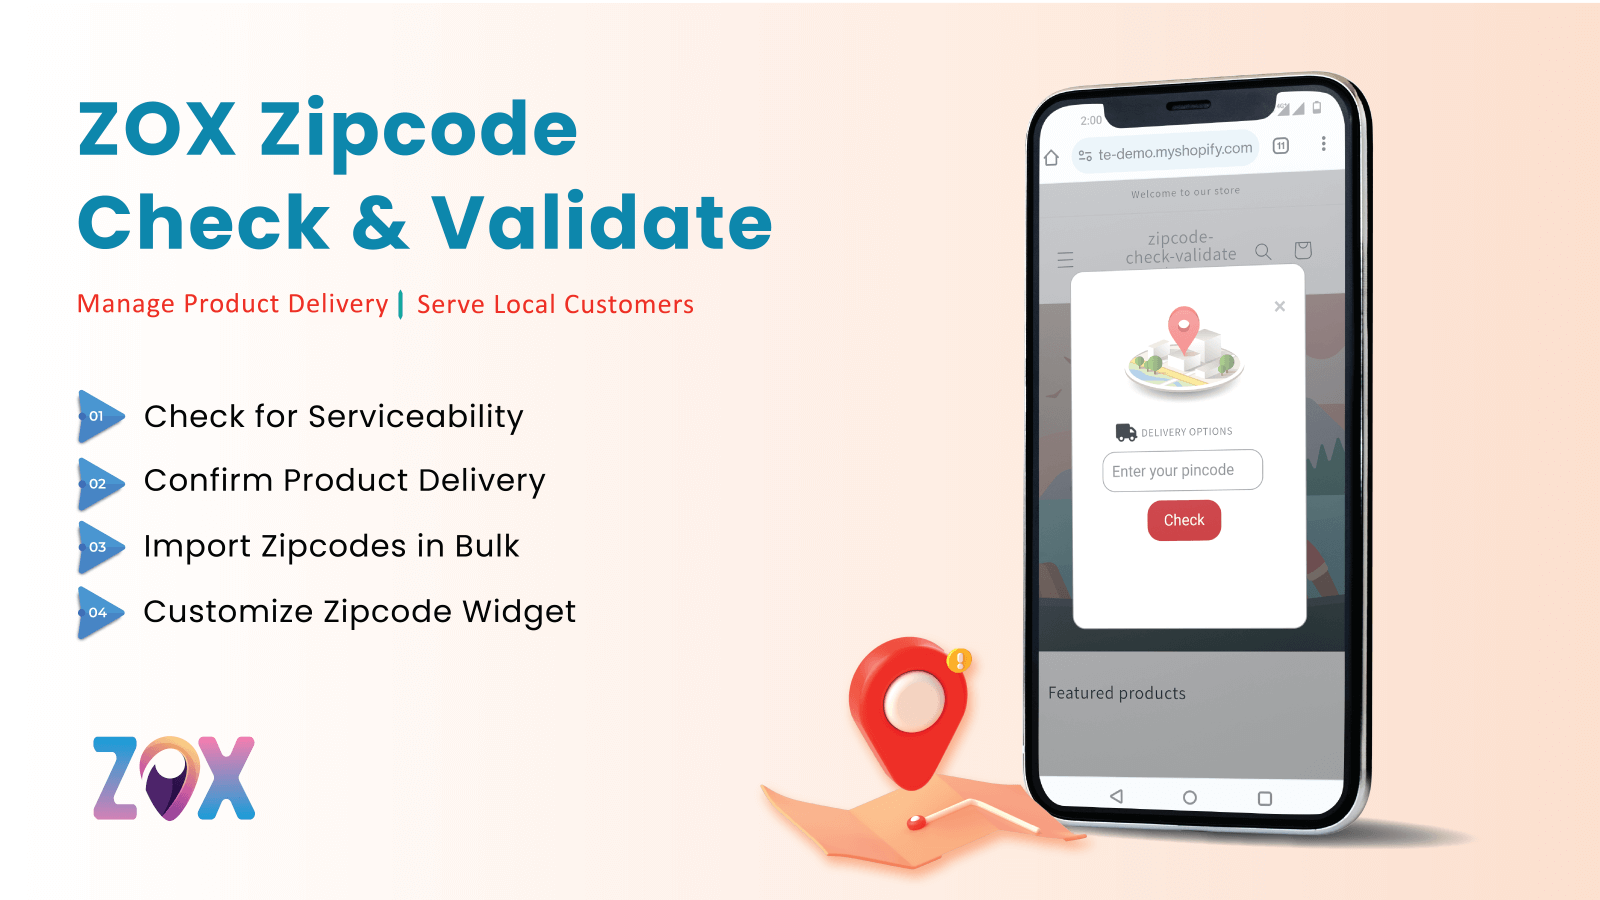 Application Shopify ZOX Zipcode Check & Validate